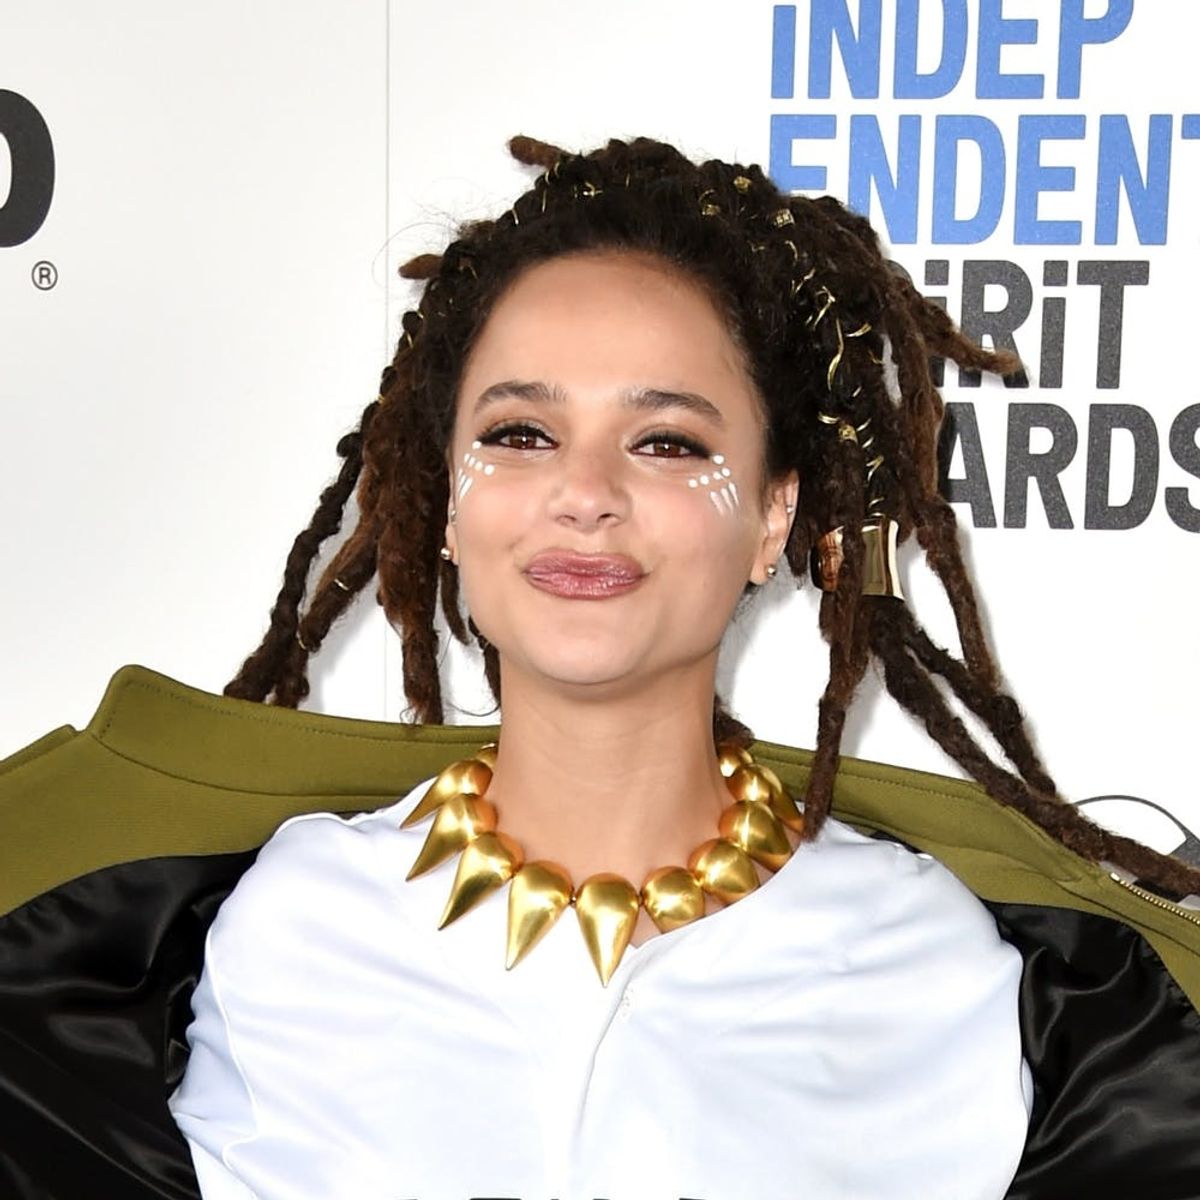 This Indie Actress Continued the Red Carpet Politics Trend in a Black Lives Matter Jersey